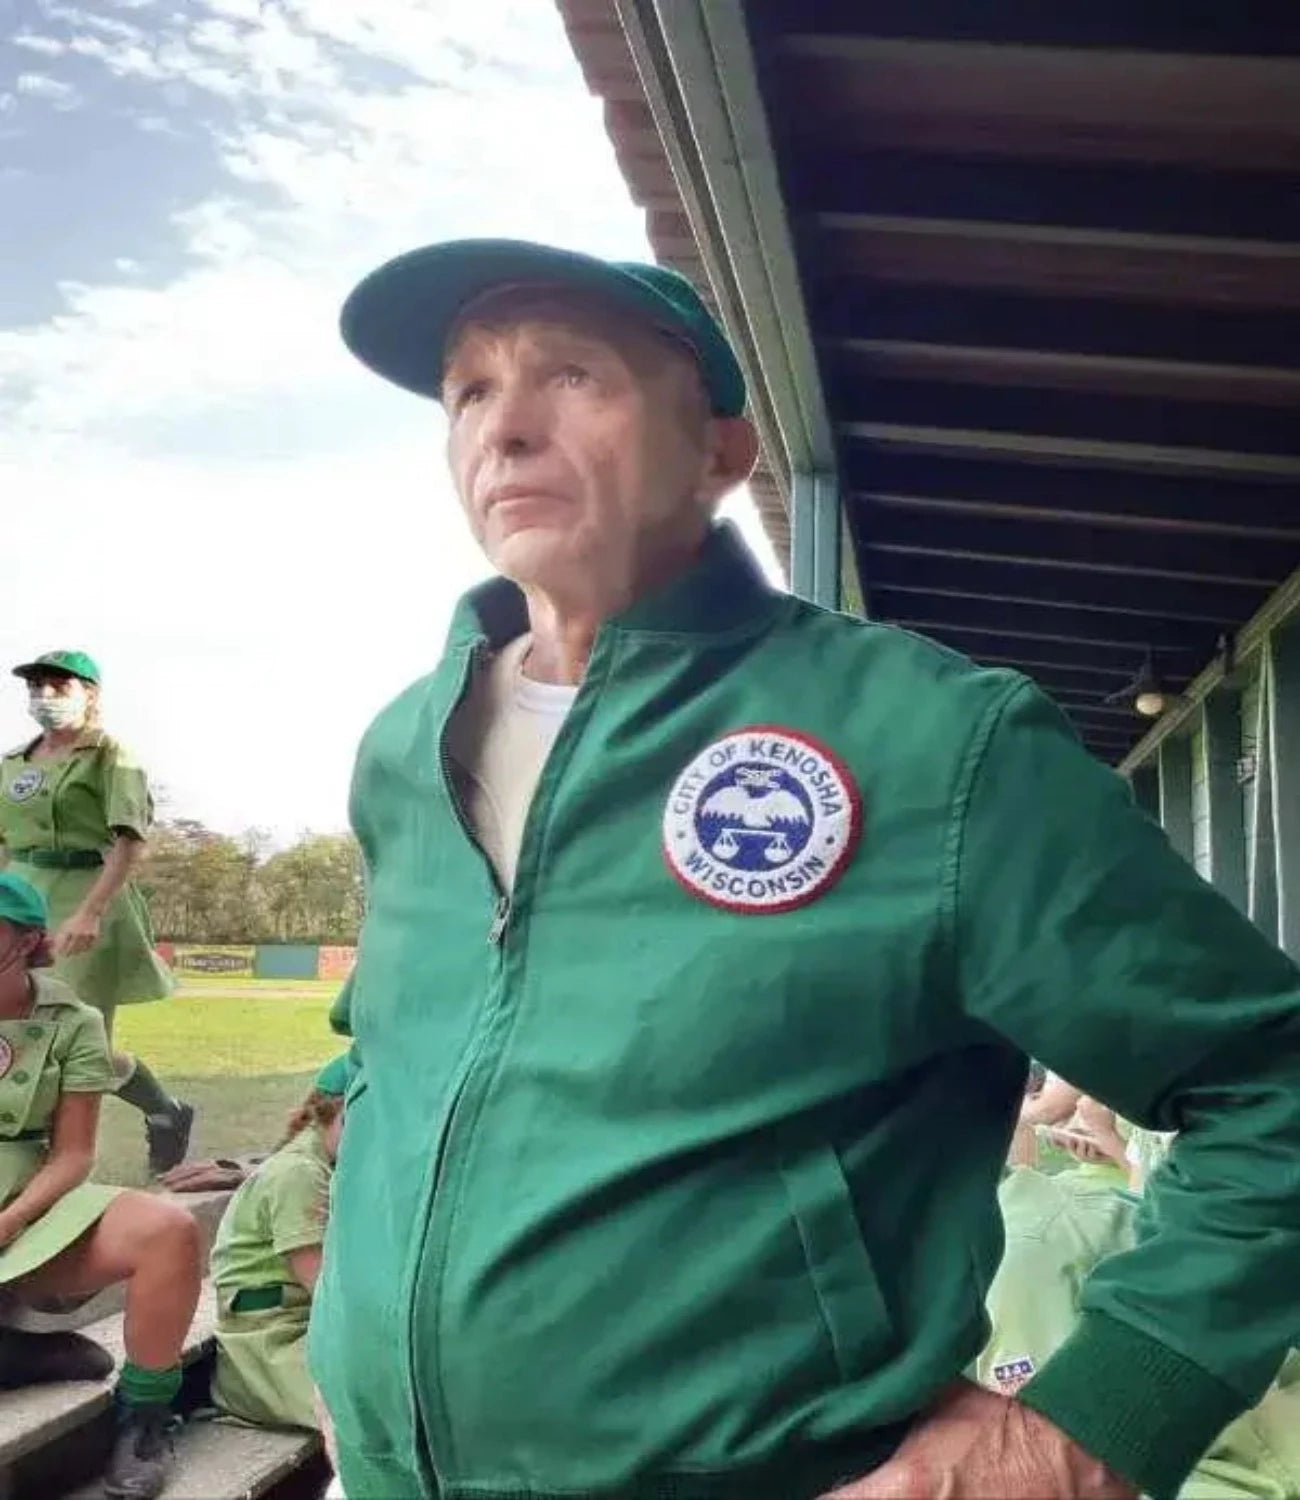 A League of Their Own Umpire Green Jacket